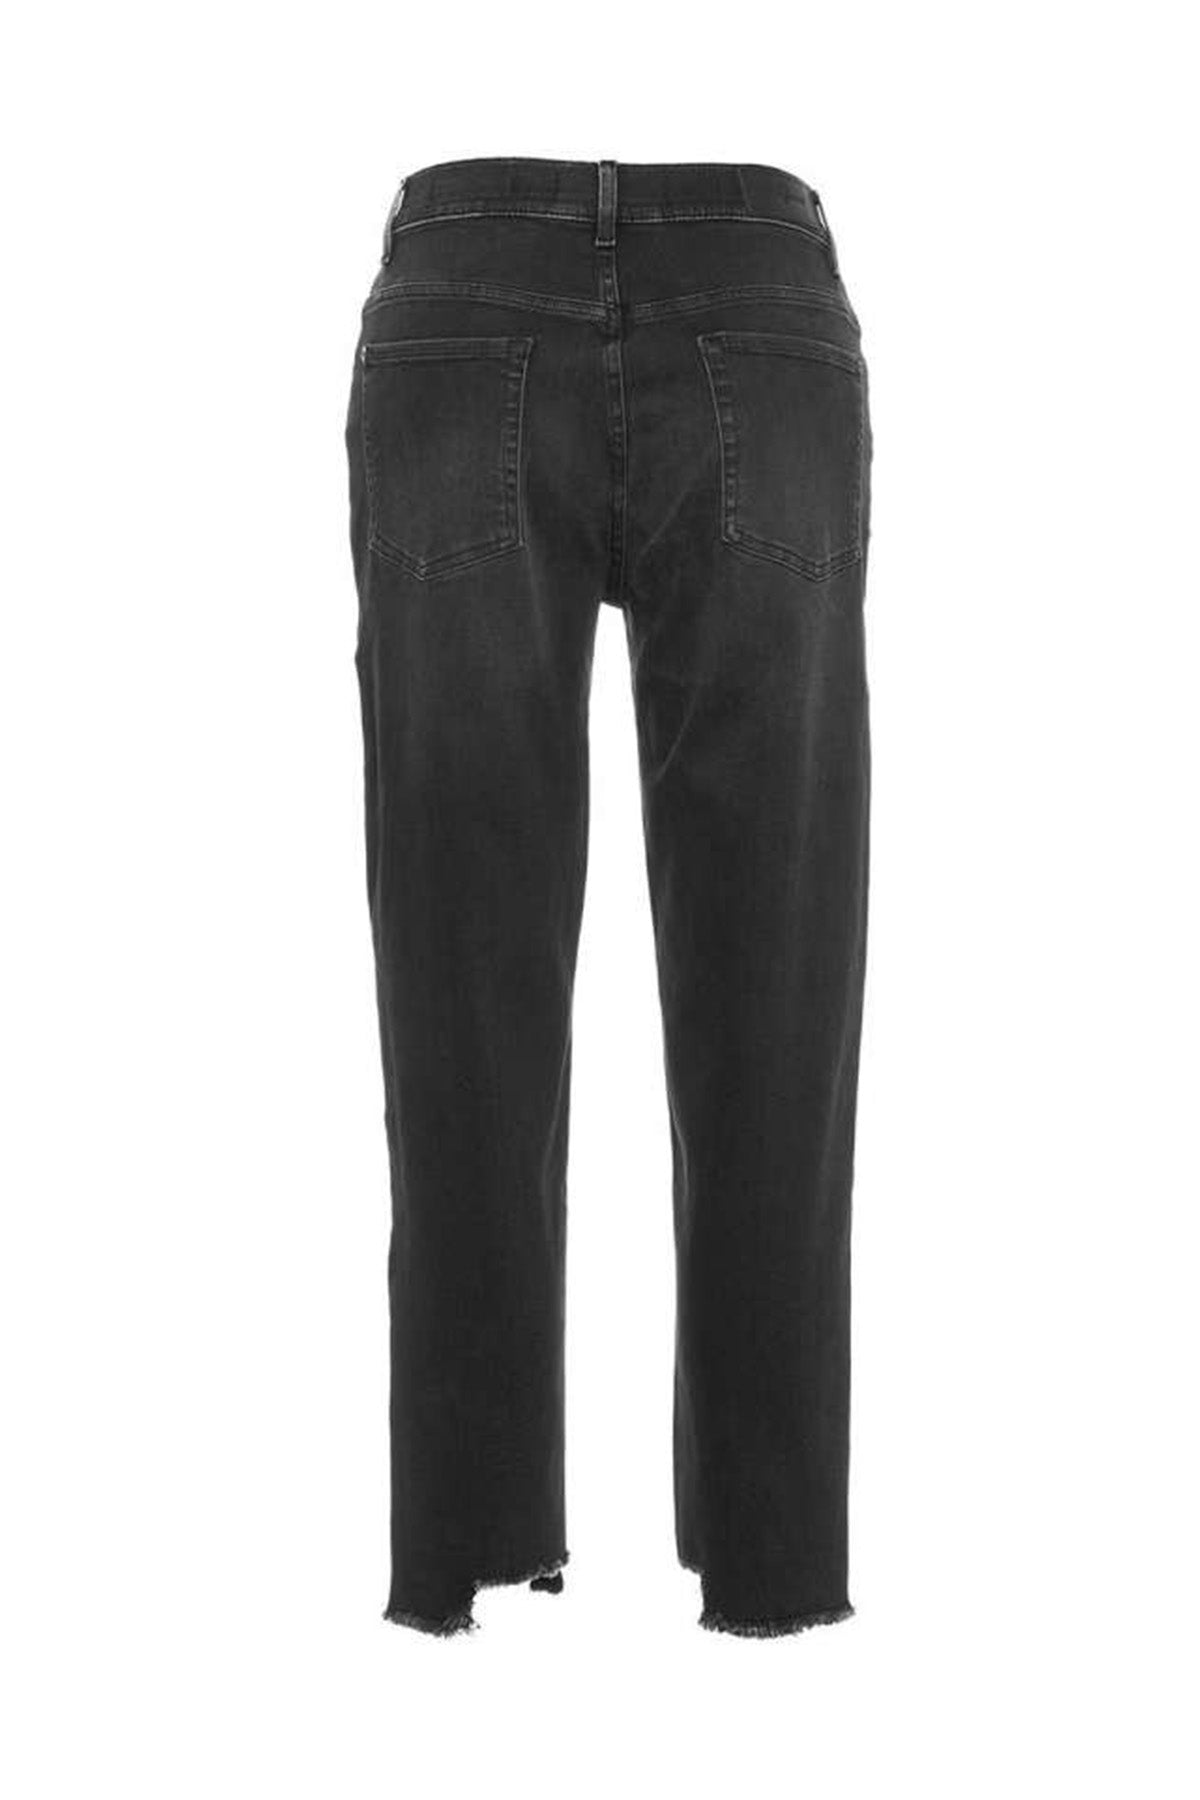 7 For All Mankind Malia Luxe Vintage Straight Fit Streç Jeans-Libas Trendy Fashion Store